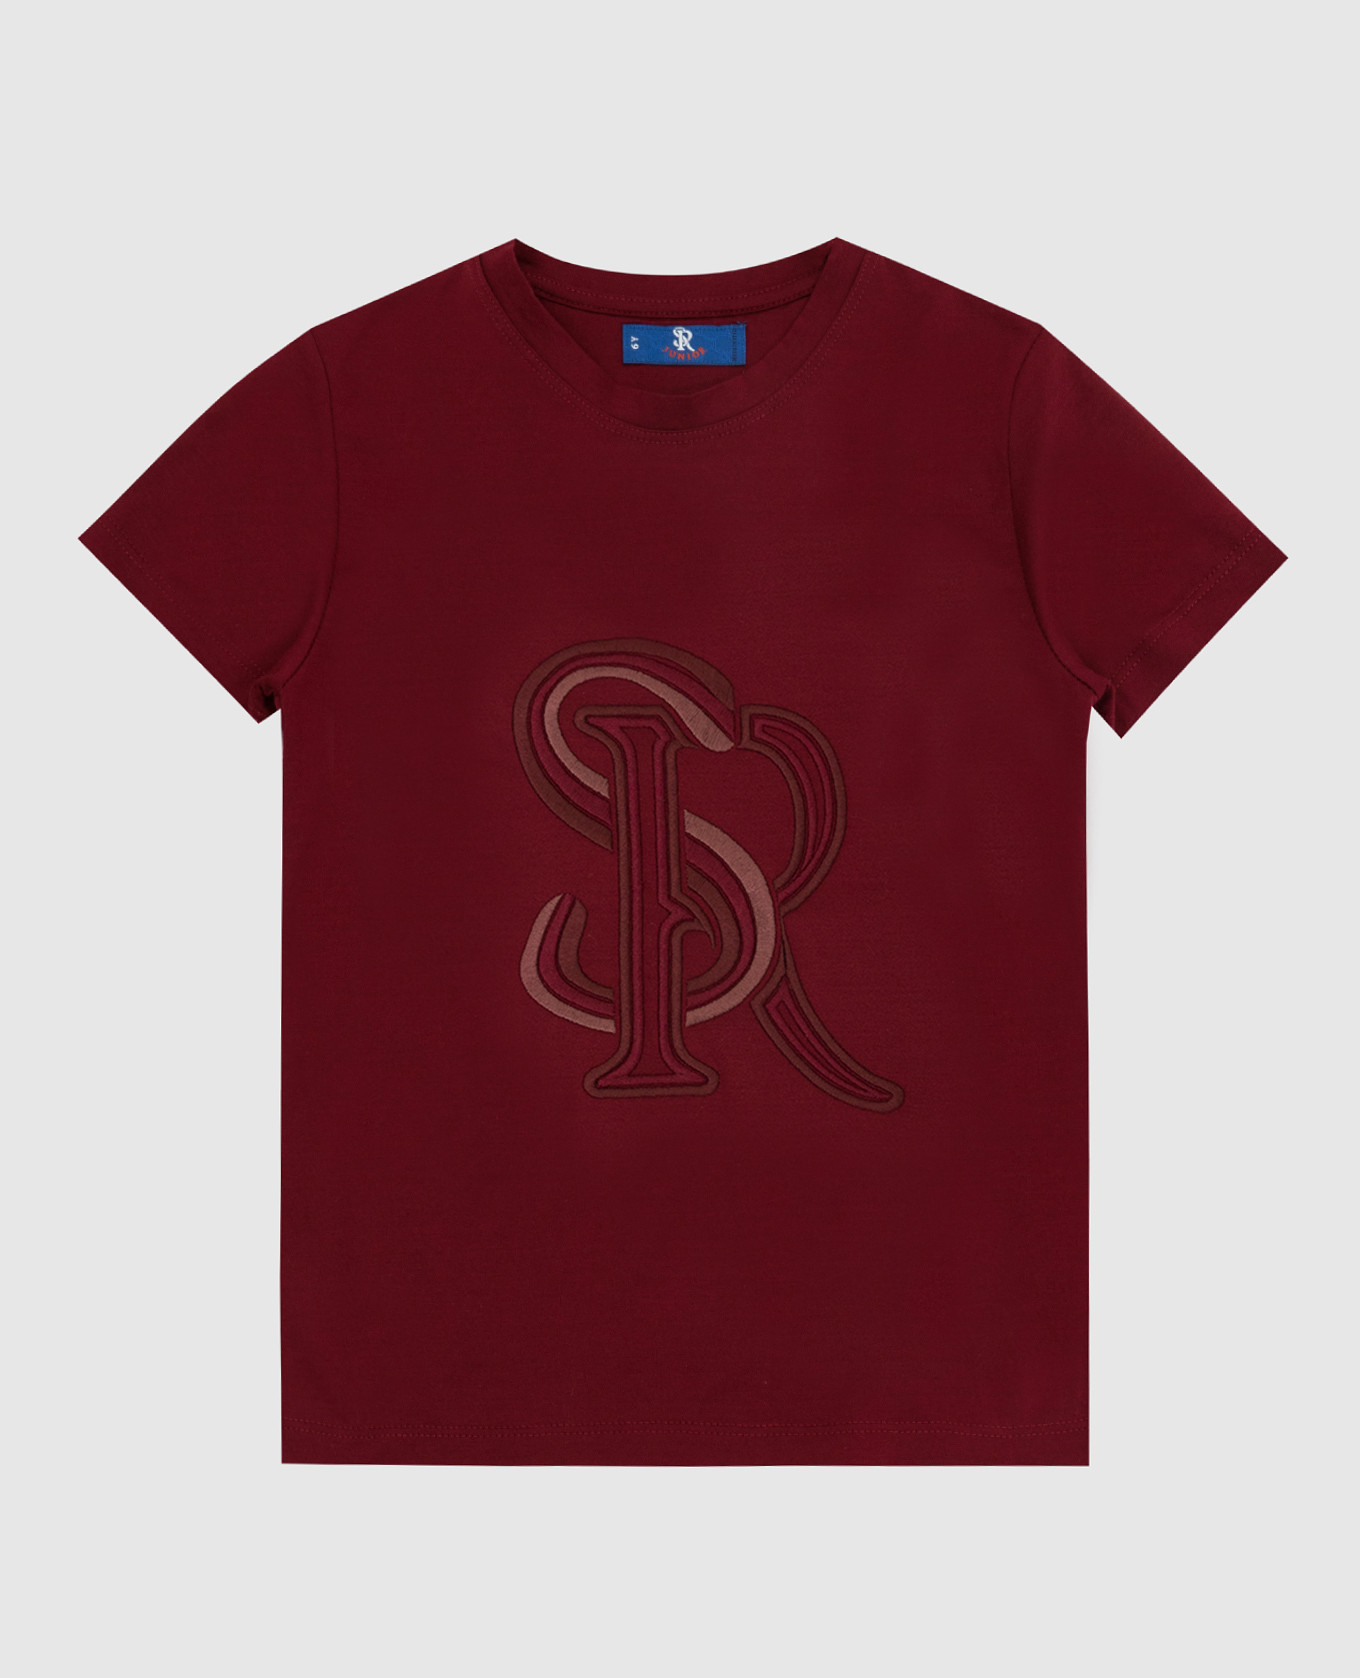 Children's burgundy t-shirt with monogram embroidery